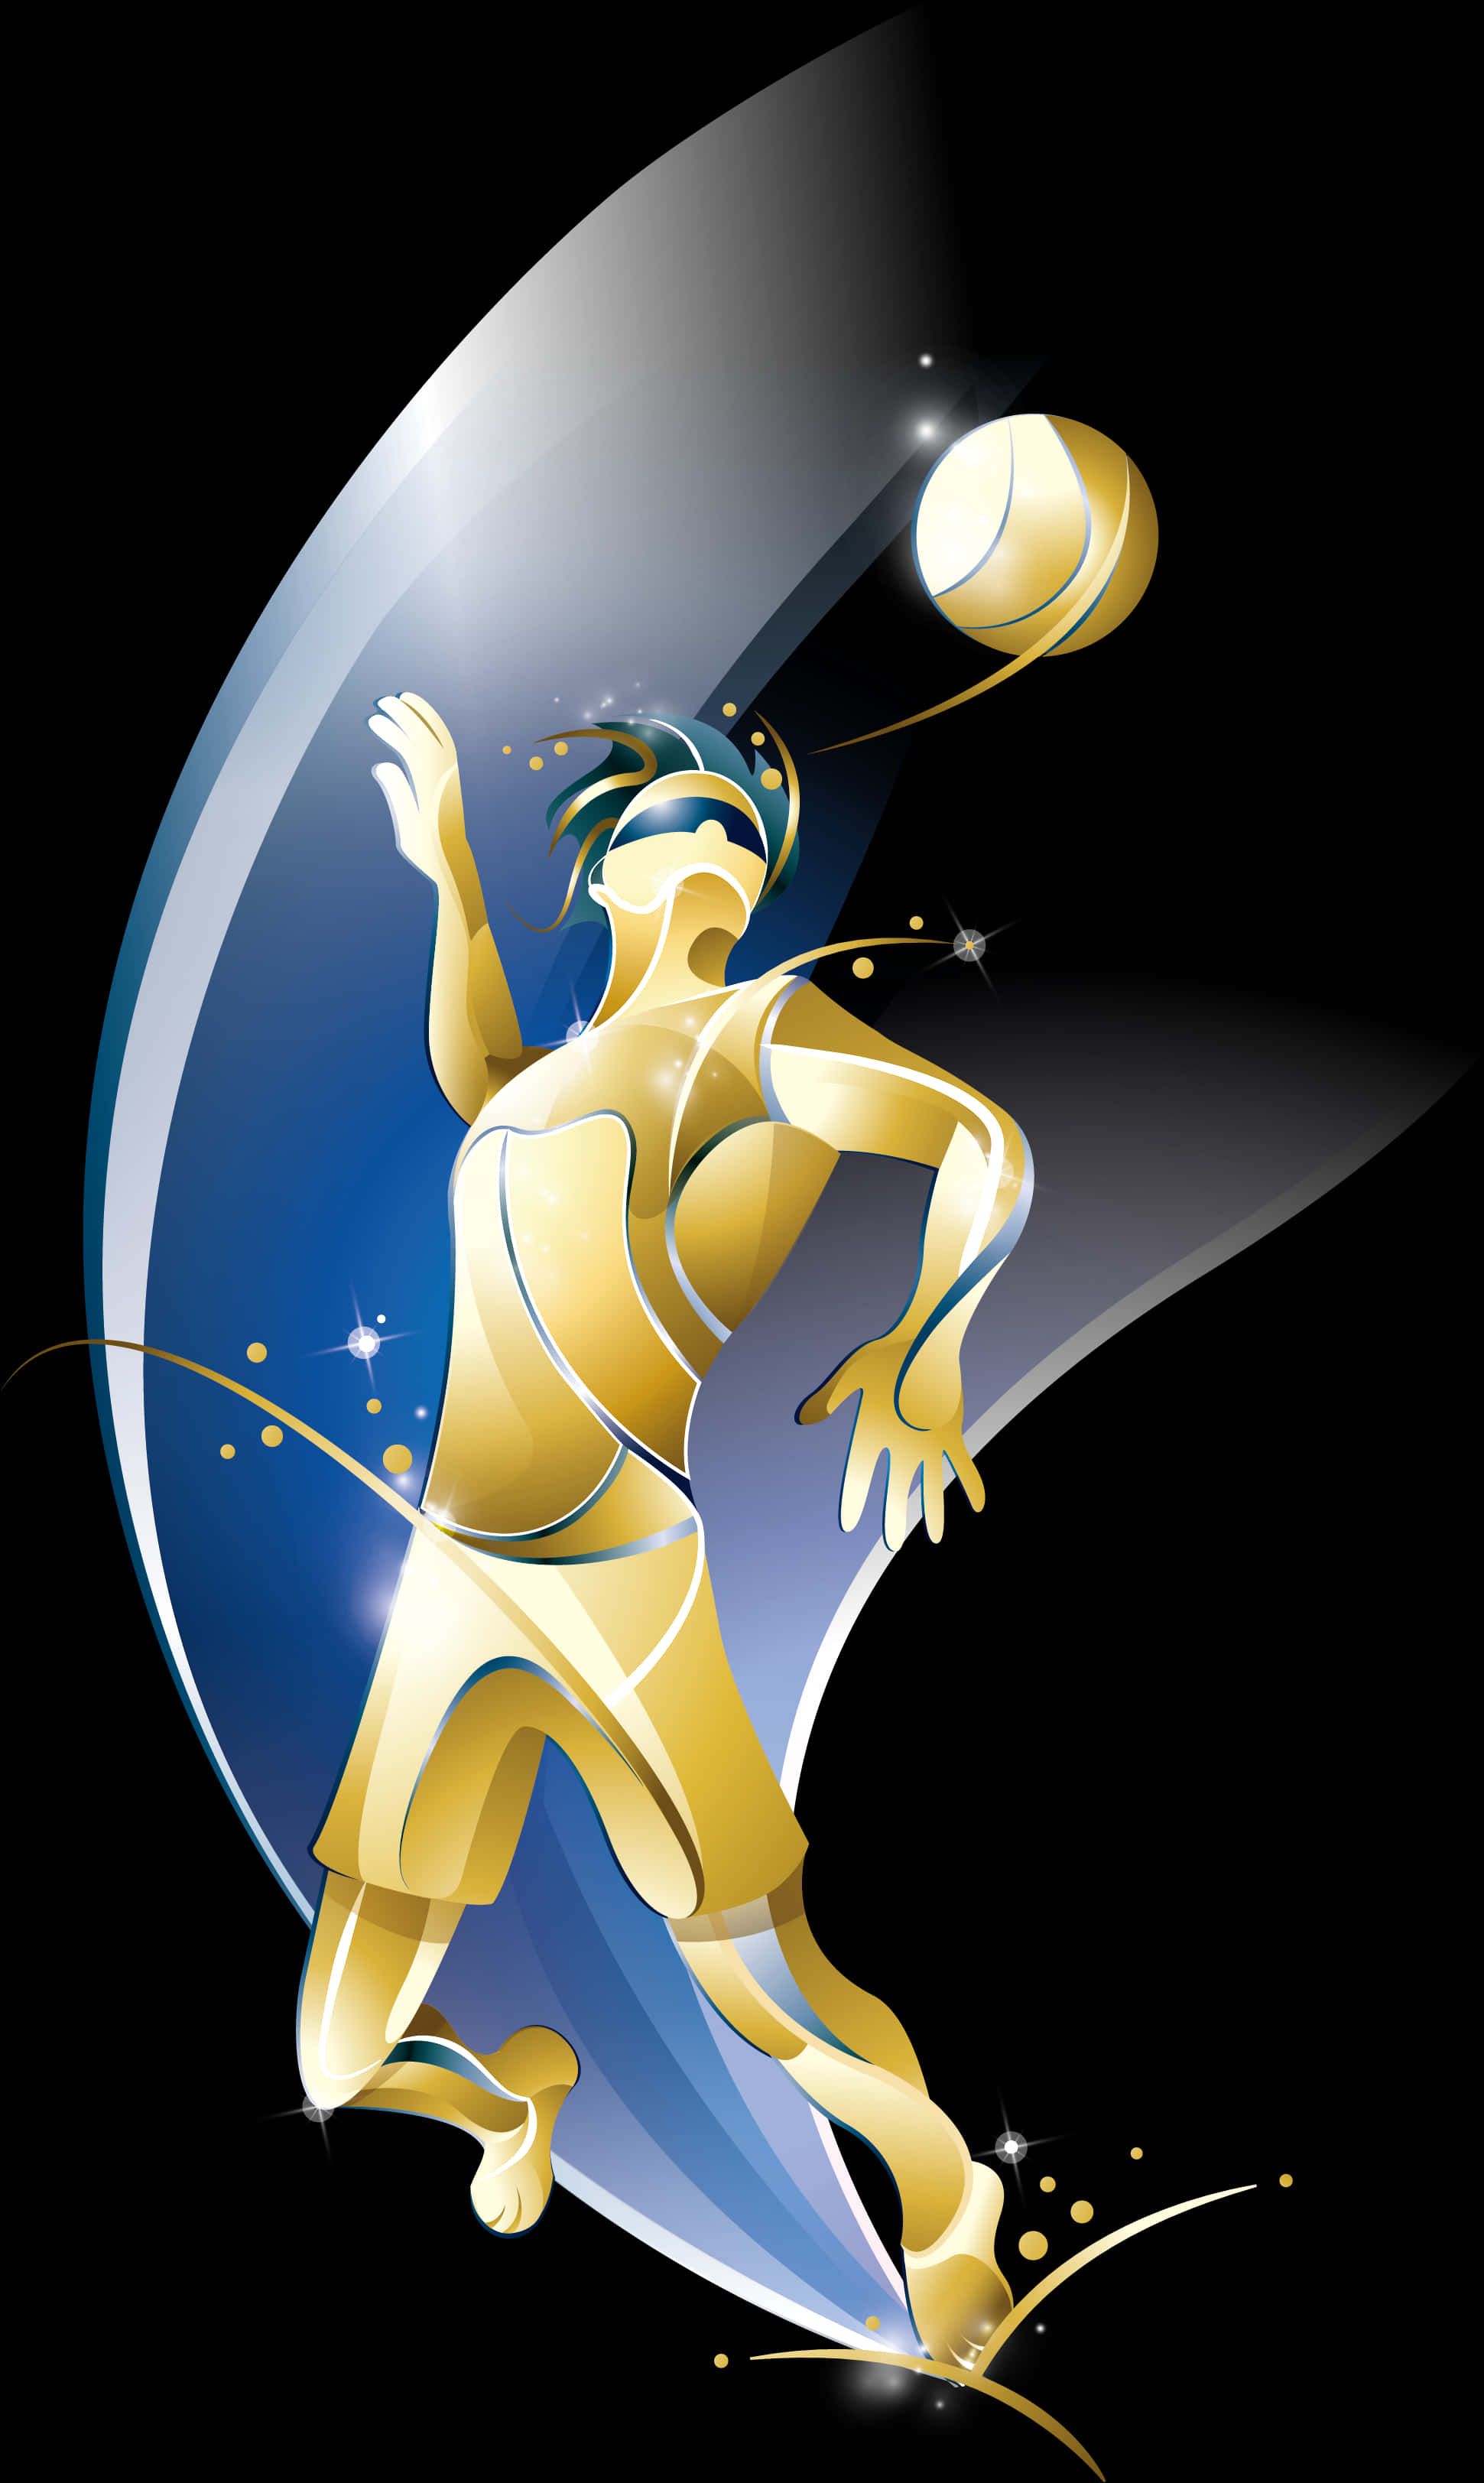 Dynamic Volleyball Player Illustration PNG